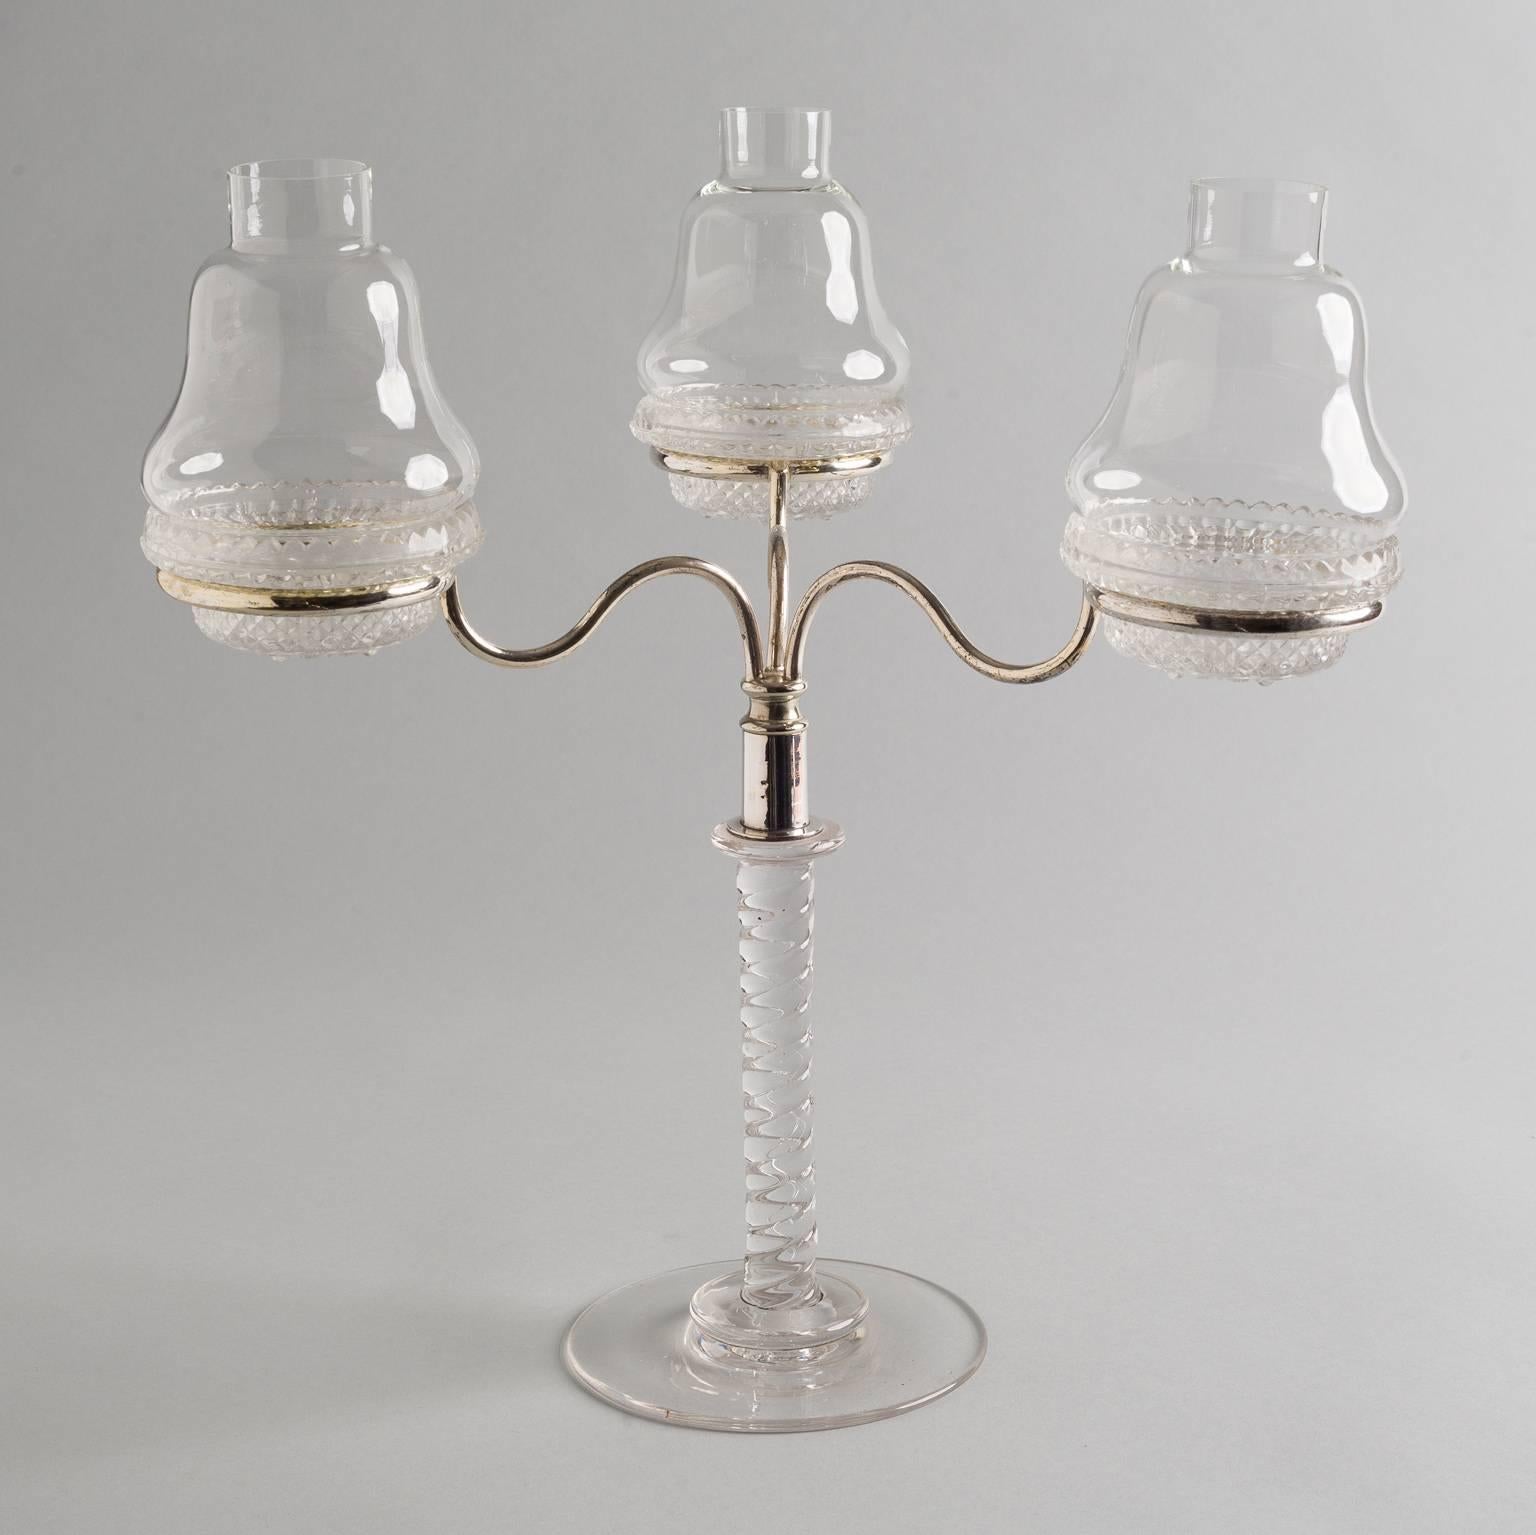 Antique Victorian molded glass and silver plate Cricklite three-arm candelabra. The three molded cups and blown glass shades sit in silver plate rings supported by a spiral glass stem on a circular base. There are seven pieces. Cricklites were